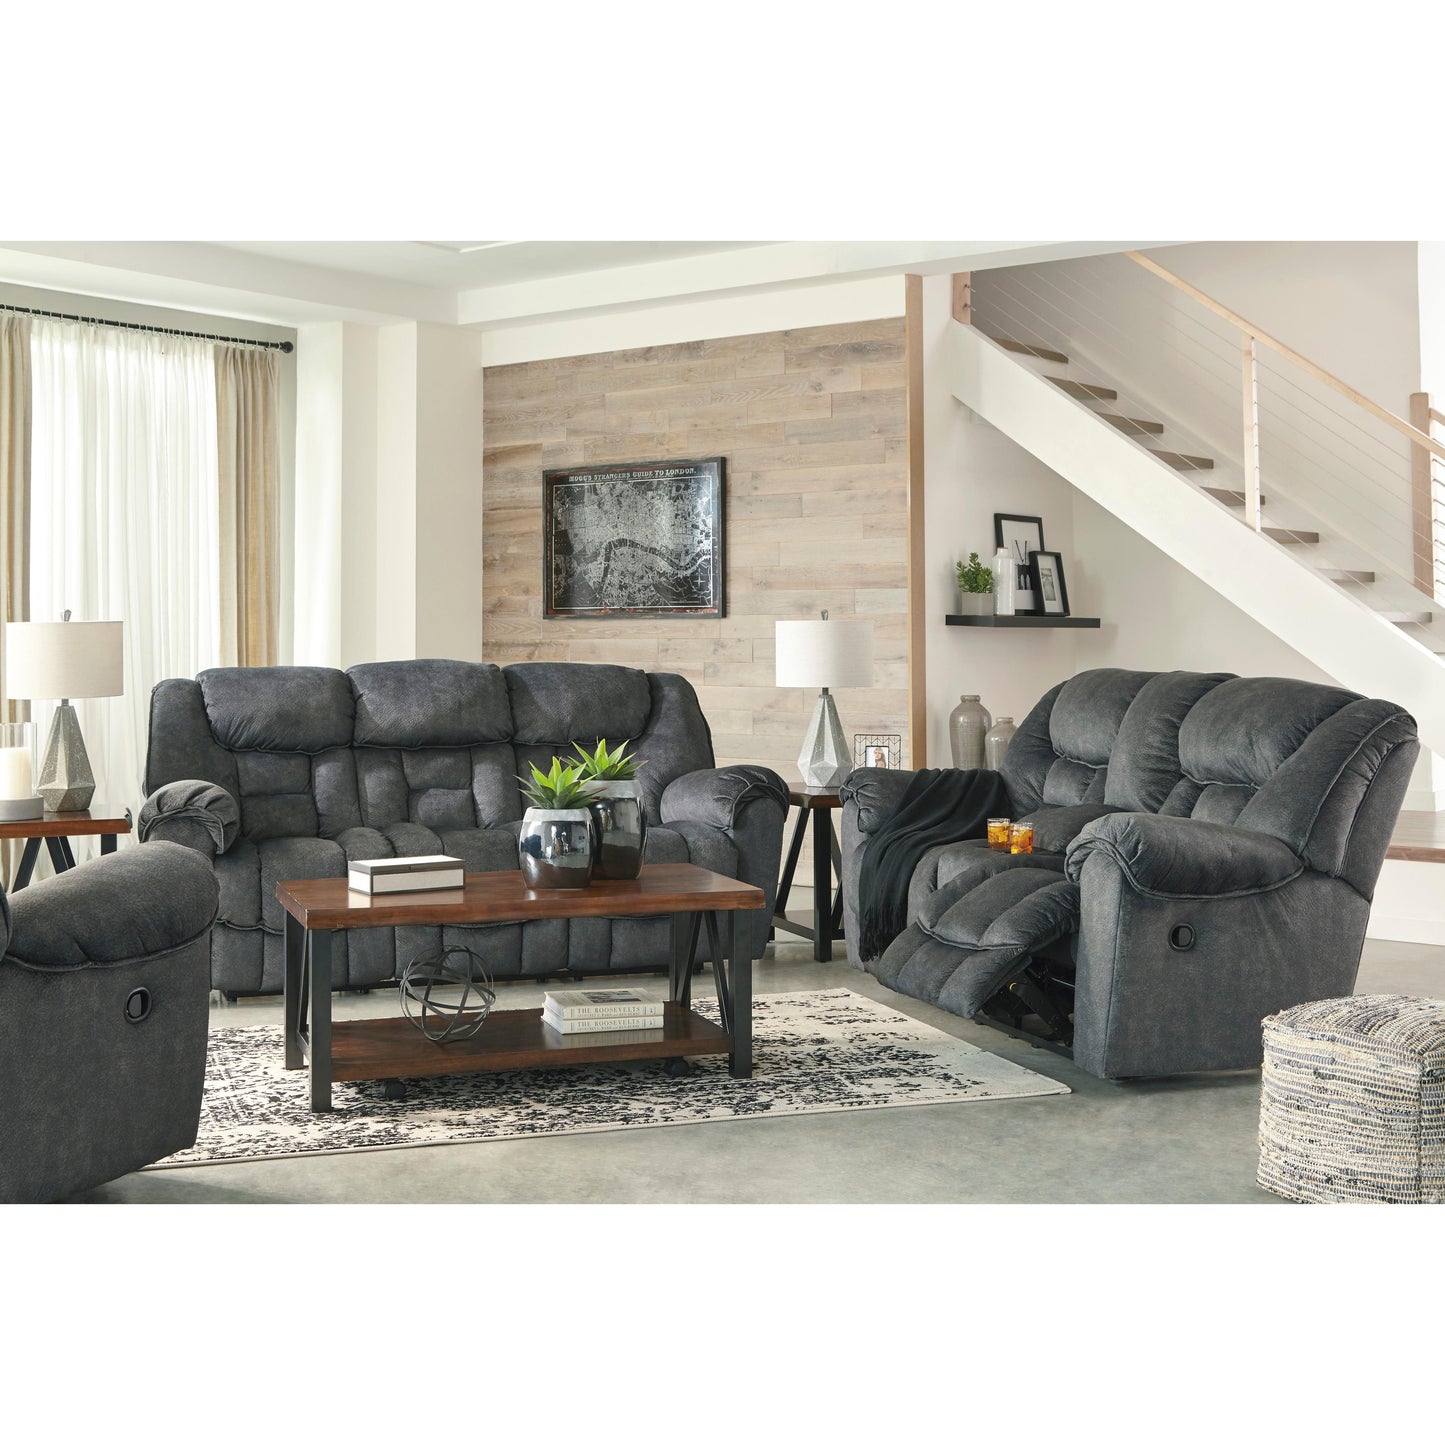 Signature Design by Ashley Capehorn Reclining Fabric Loveseat 7690294